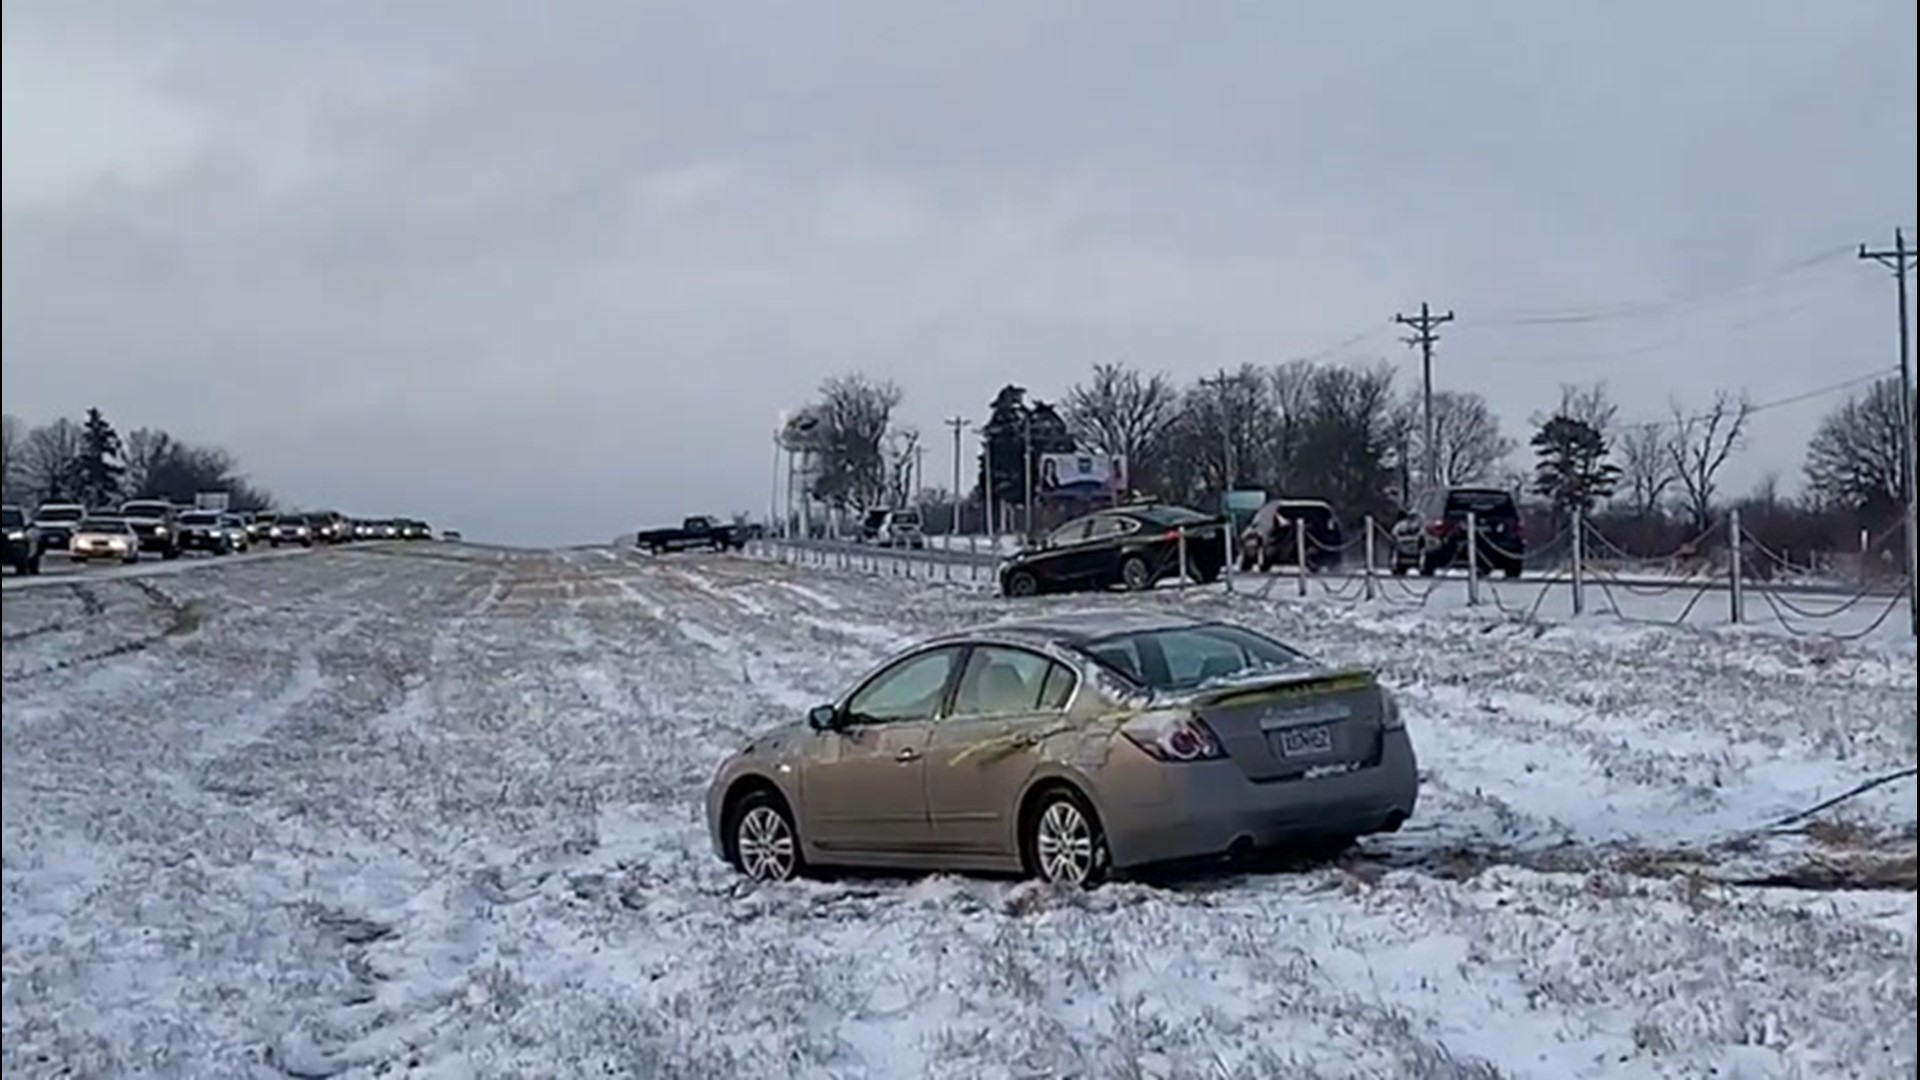 There were several slide-offs and crashes reported on U.S. Route 63 including three vehicles seen here at Ashland, Missouri, on Feb. 26.